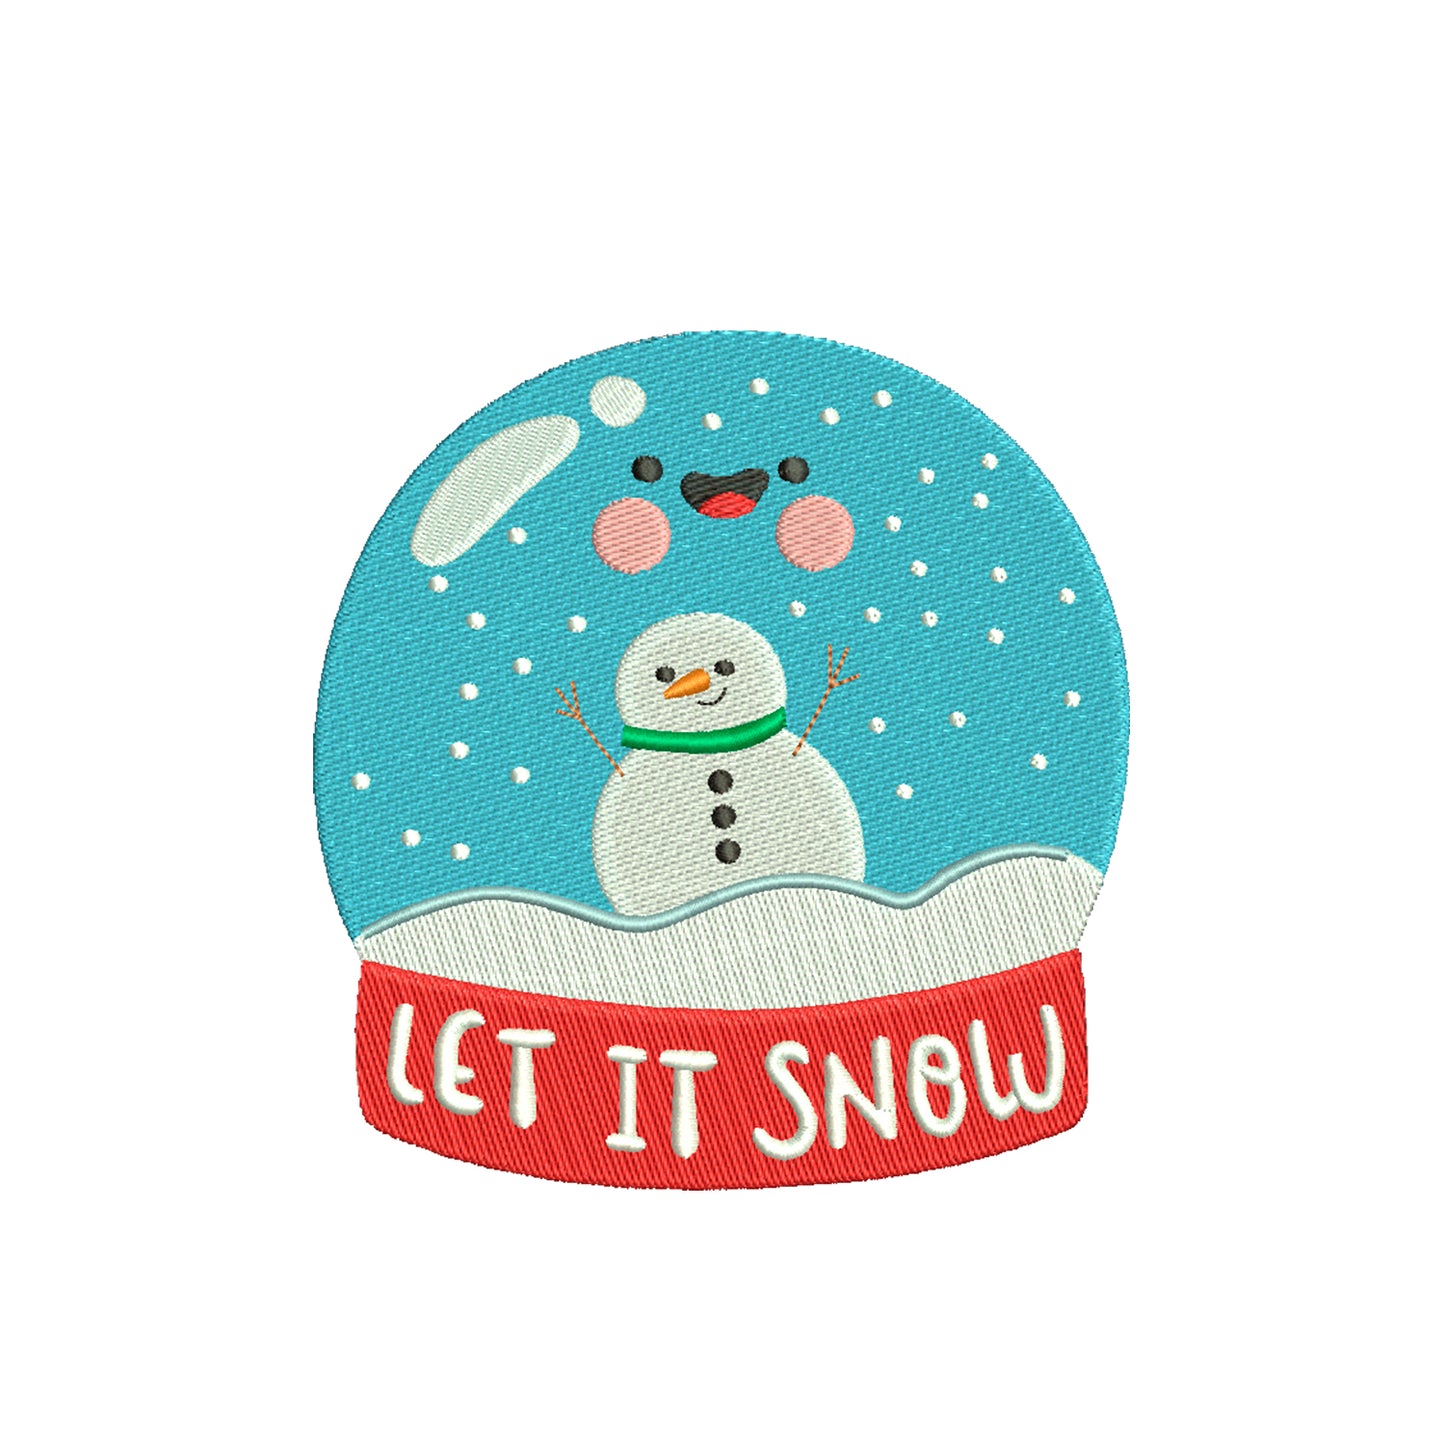 "Let it snow" snowman christmas embroidery designs christmas - 910240